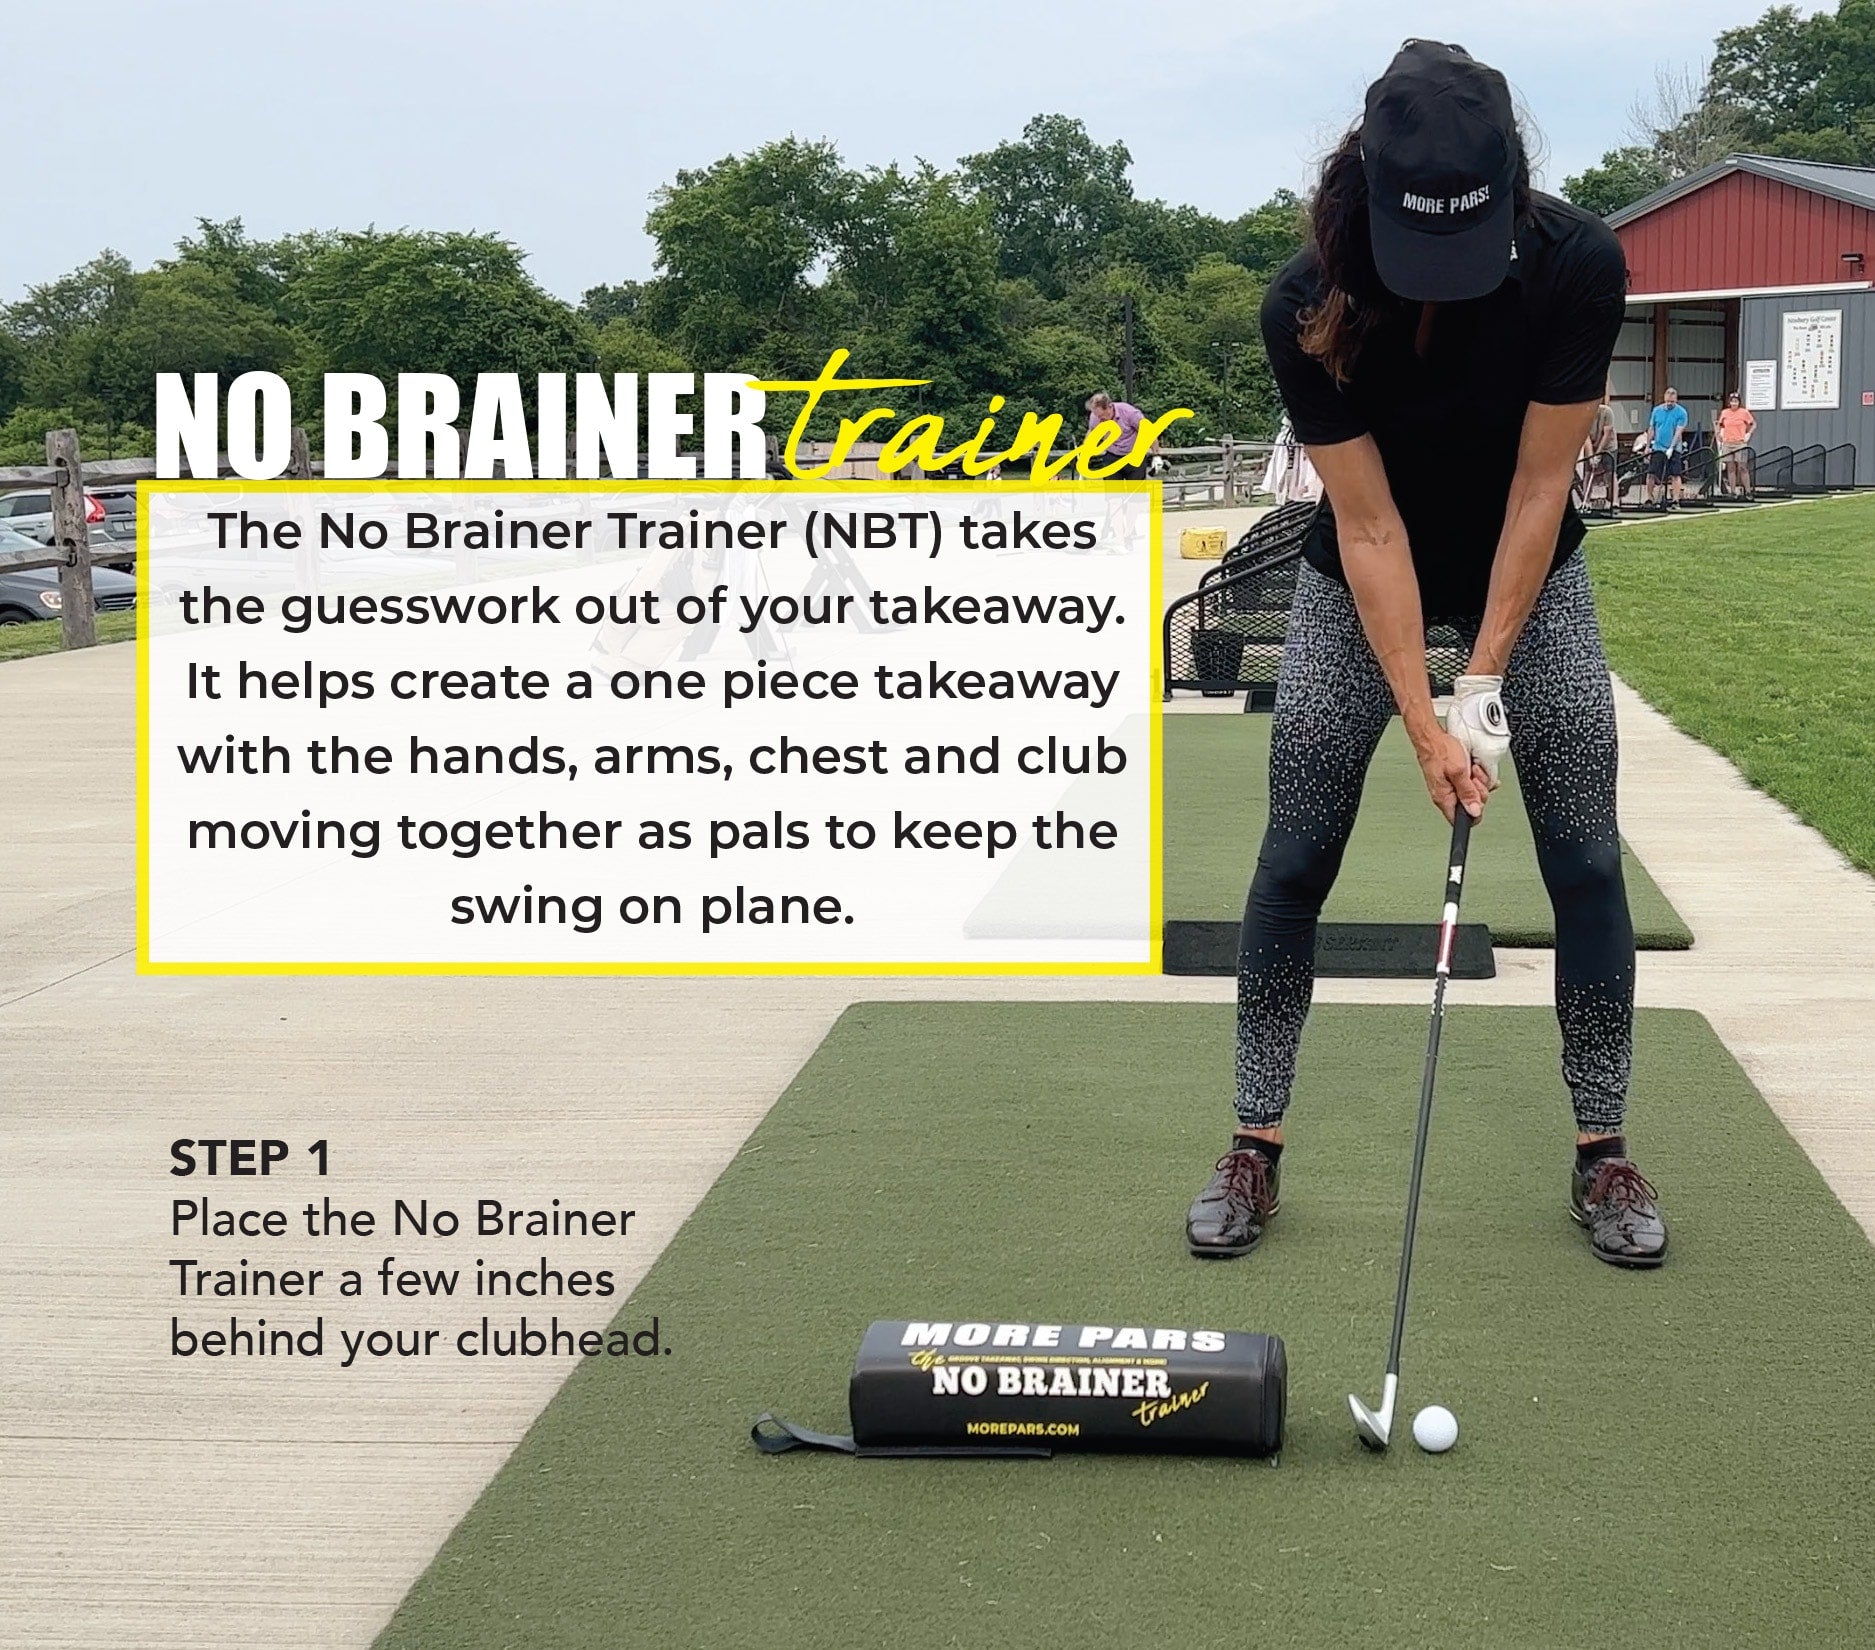 More Pars No Brainer Trainer for Takeaway – MORE PARS